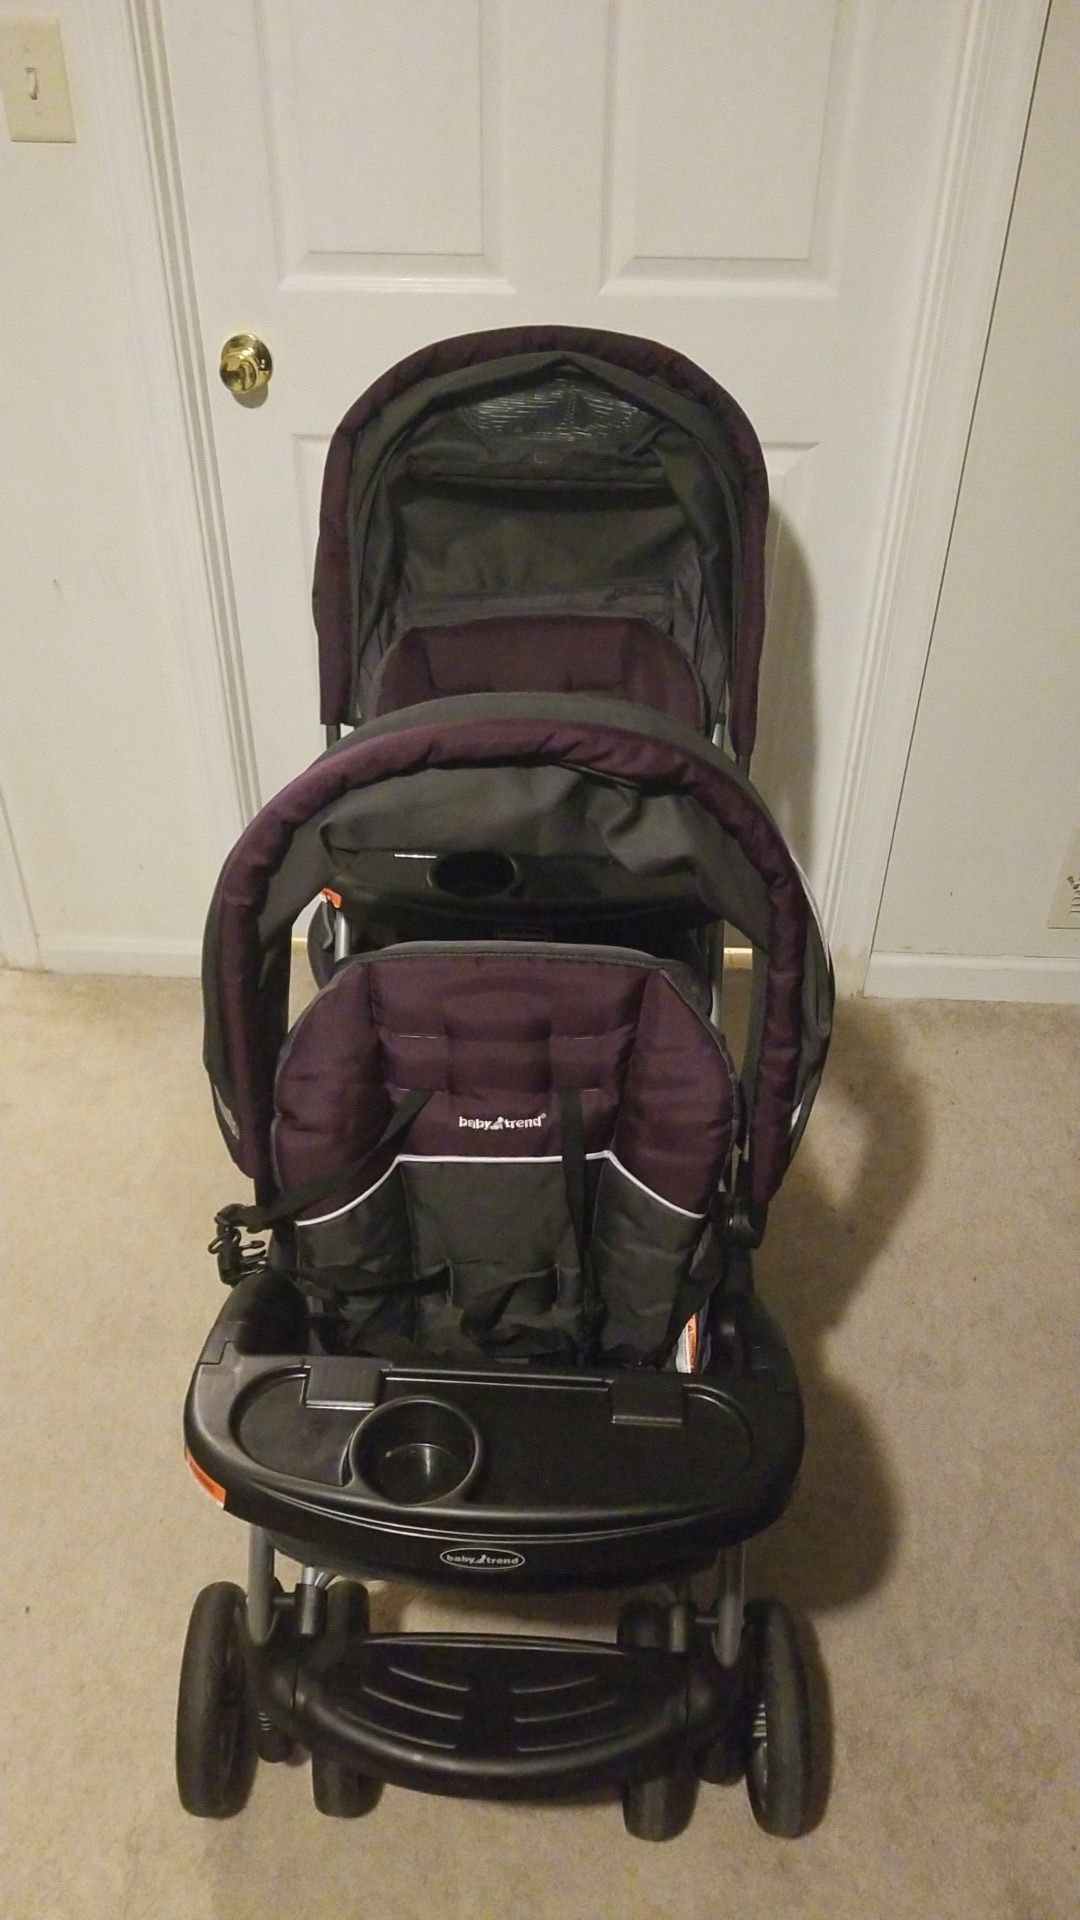 Official Baby Trend "Sit N Stand" Double Stroller